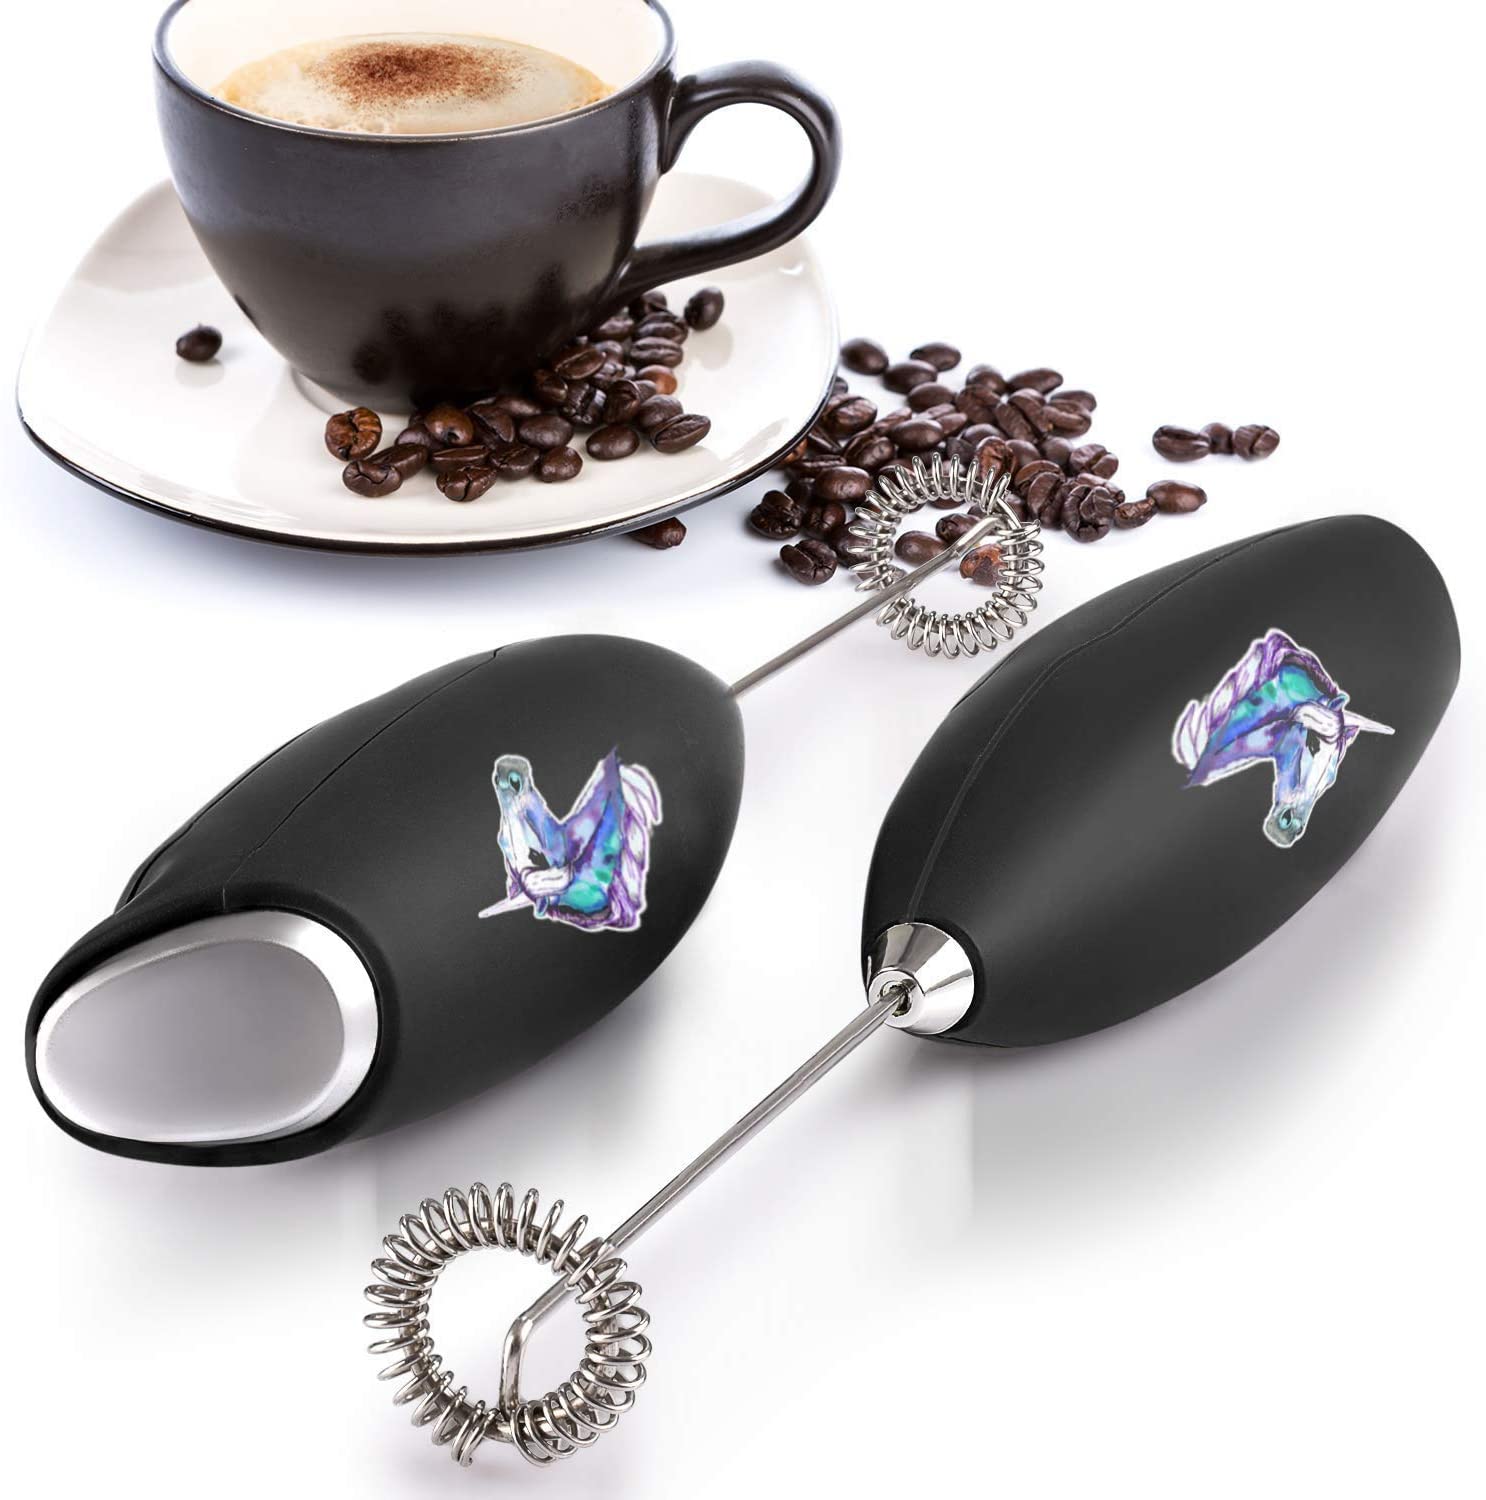 ULTRA HIGH SPEED MILK FROTHER For Coffee With NEW UPGRADED STAND -  Powerful, Compact Handheld Mixer with